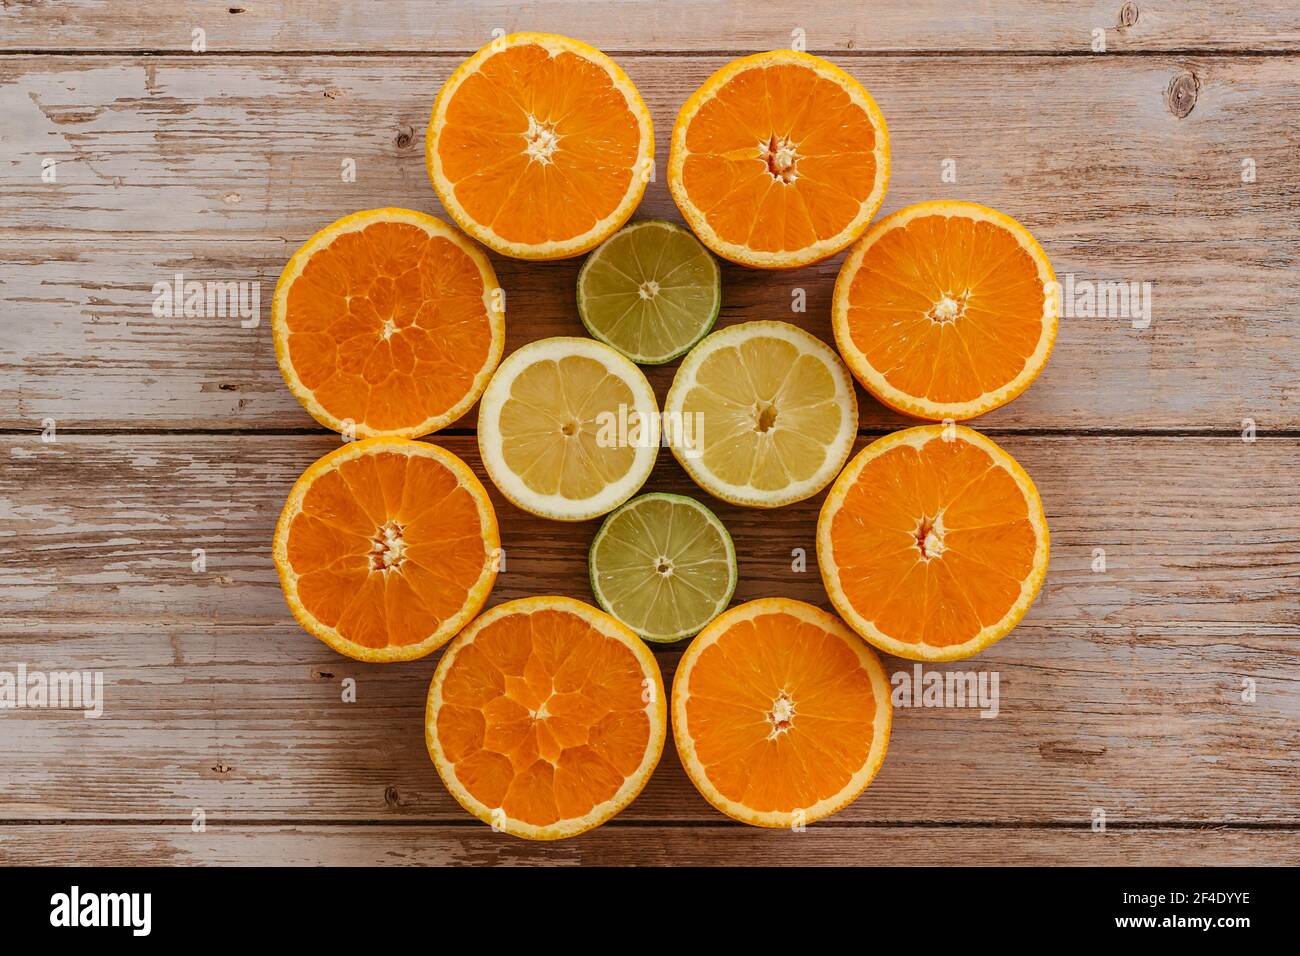 Oranges,limes and lemons slides on wooden table view from above. Beautiful background with fresh fruit half cut.Healthy eating vitamin C.Summer tropic Stock Photo